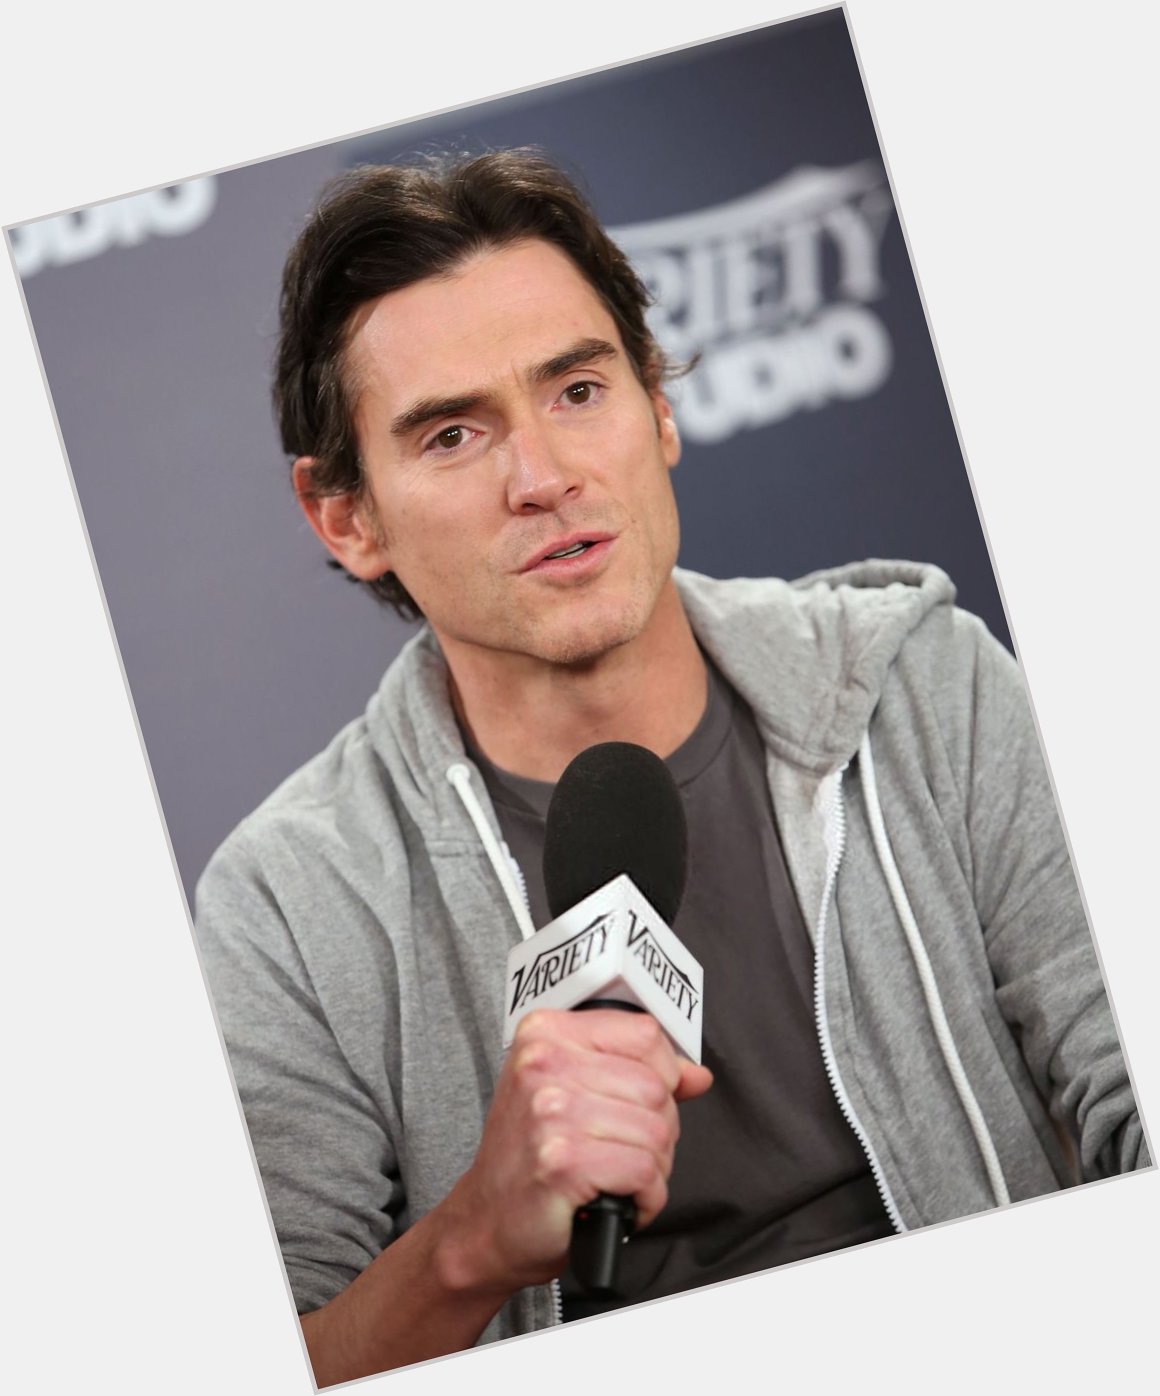  Acting is an expression of imagination. No firsthand knowledge is necessary. - Happy 50th Birthday, Billy Crudup! 